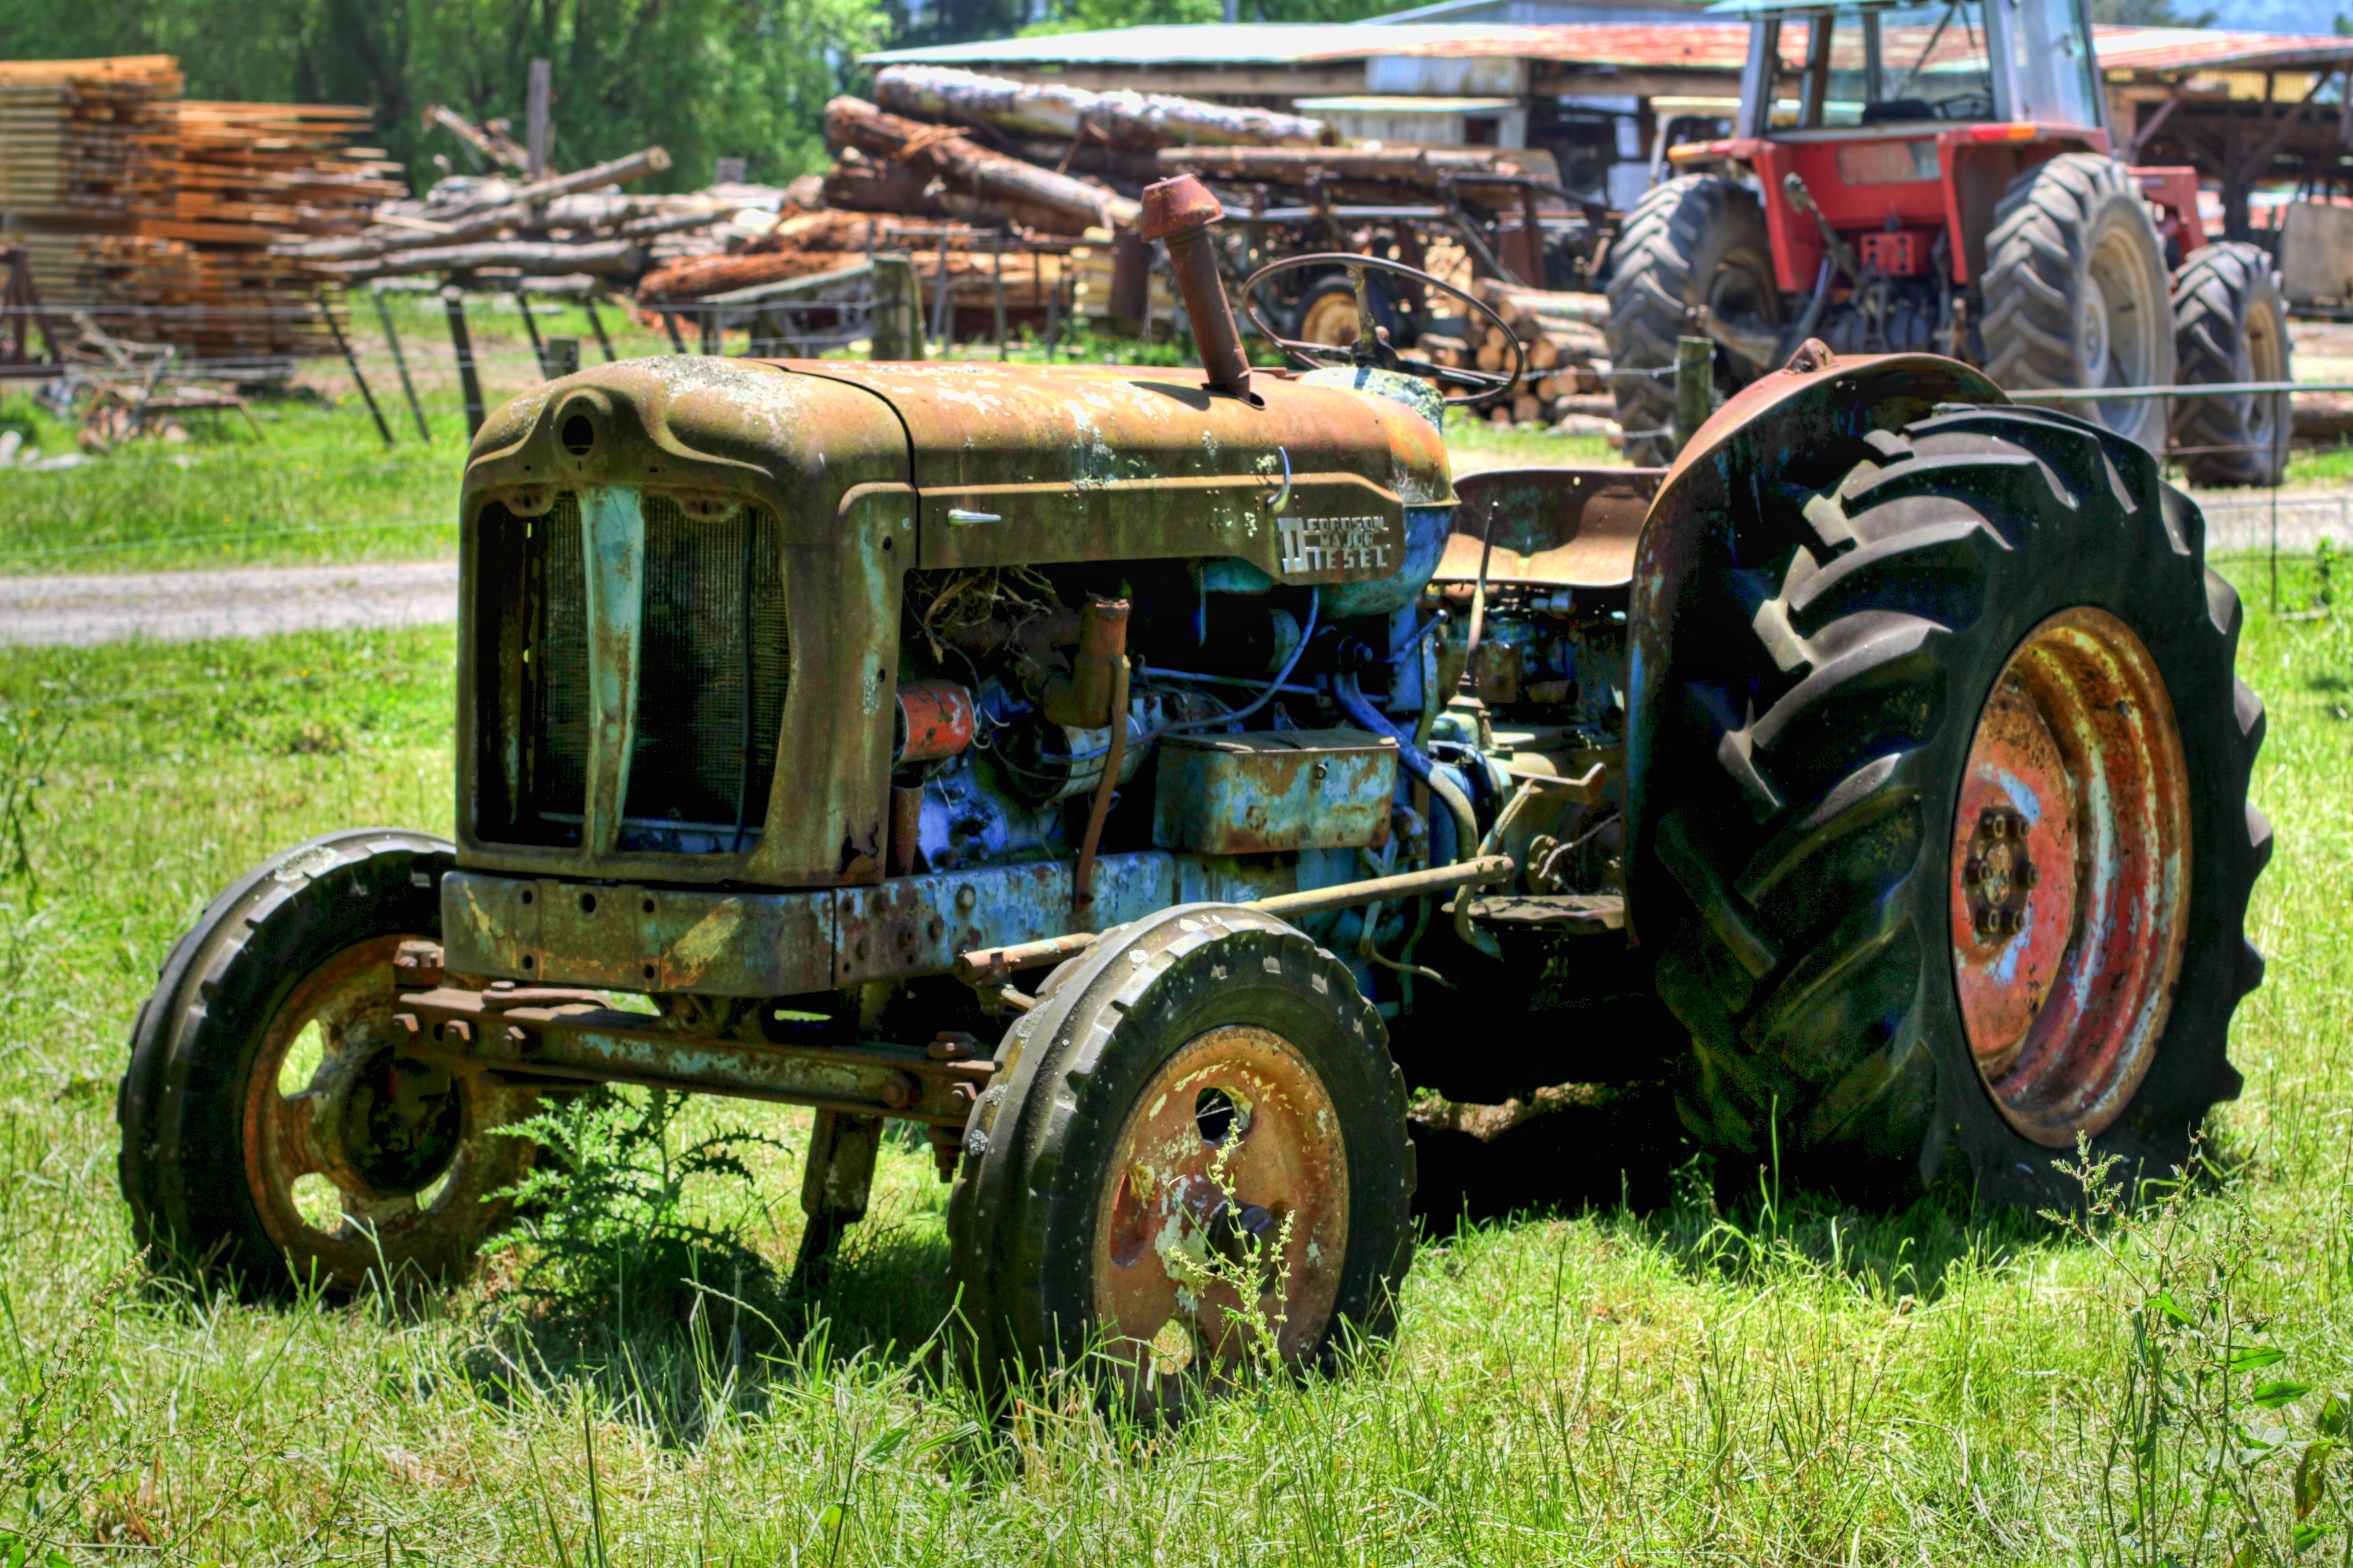 Old tractor - Fordson Major Diesel, Waikato, New Zealand | Flickr ...